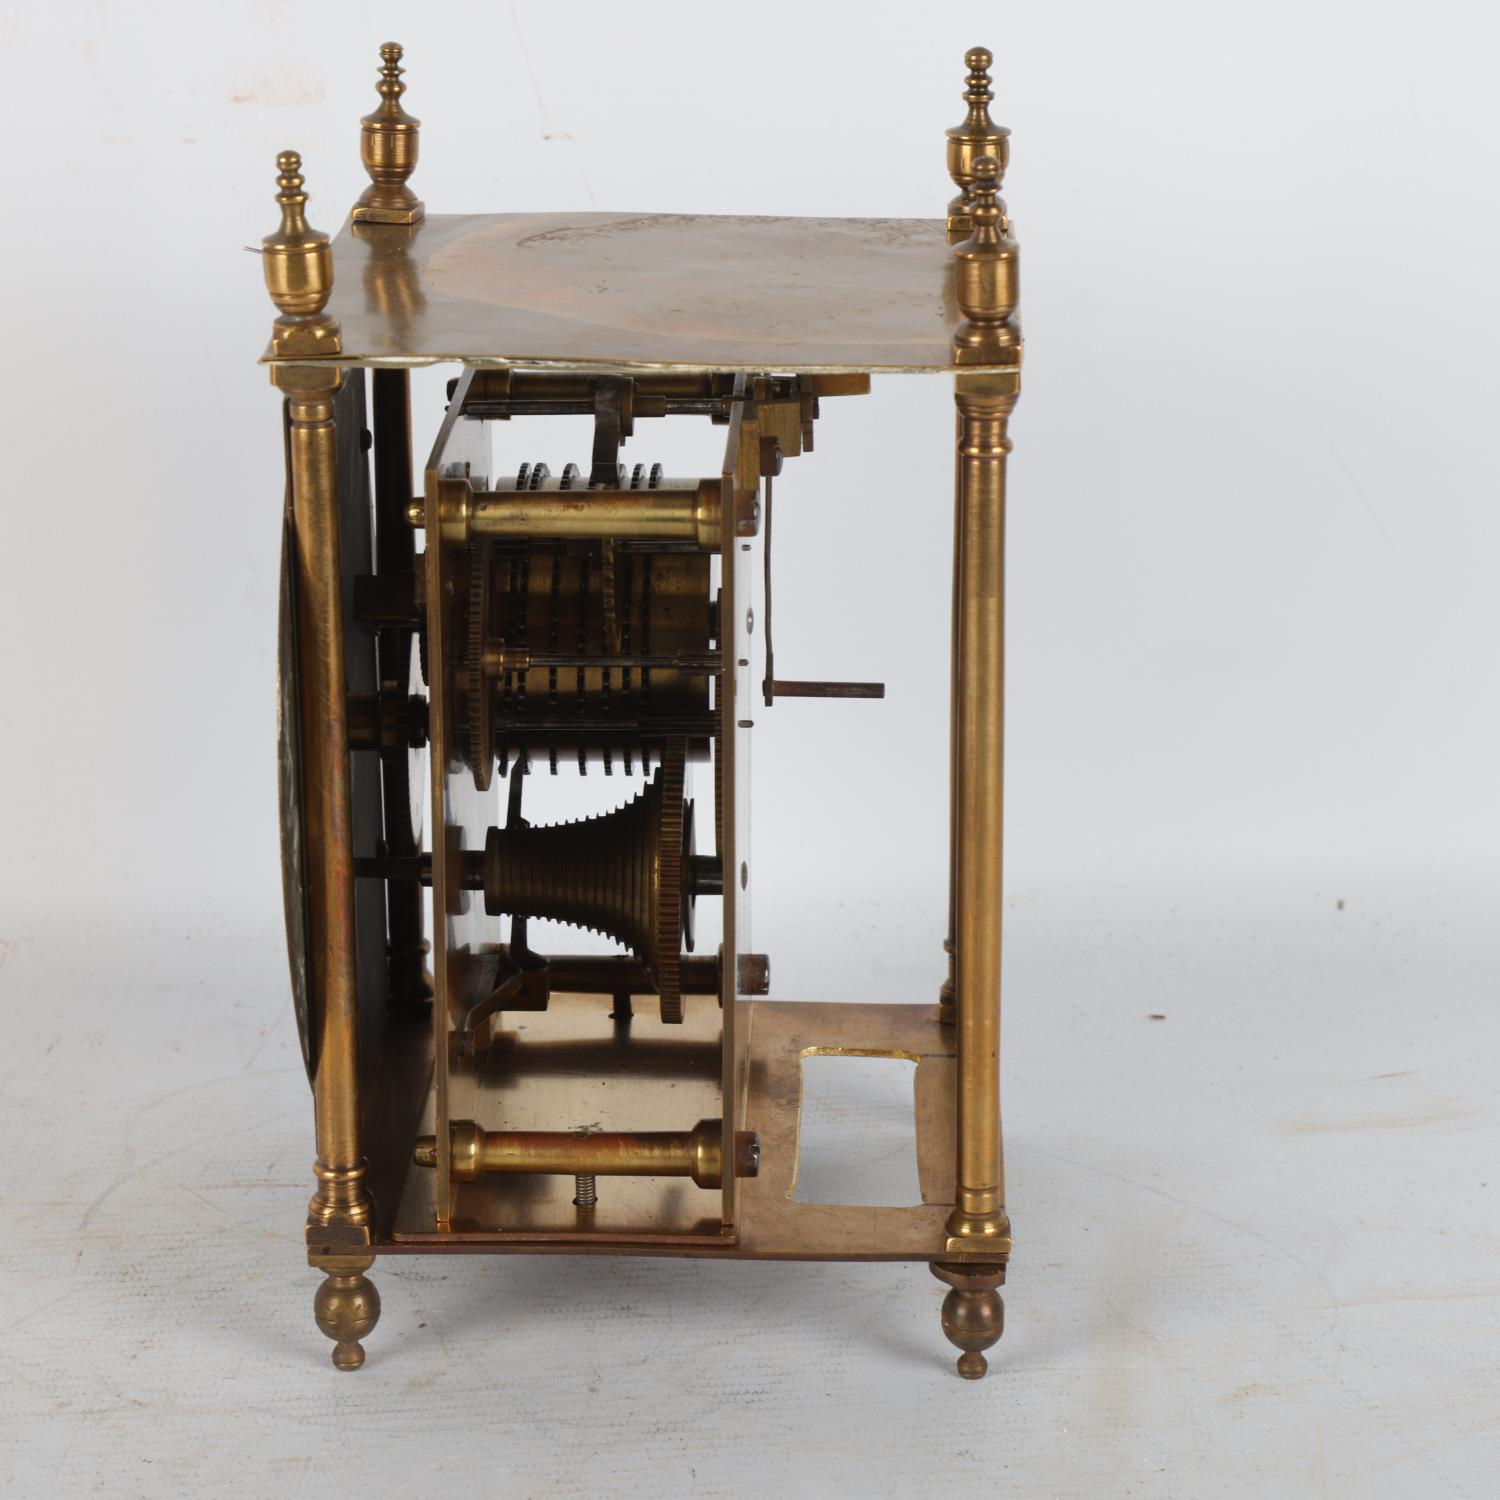 A brass lantern clock, 8-day chain driven single fusee movement, height 21cm, with pendulum - Image 2 of 3